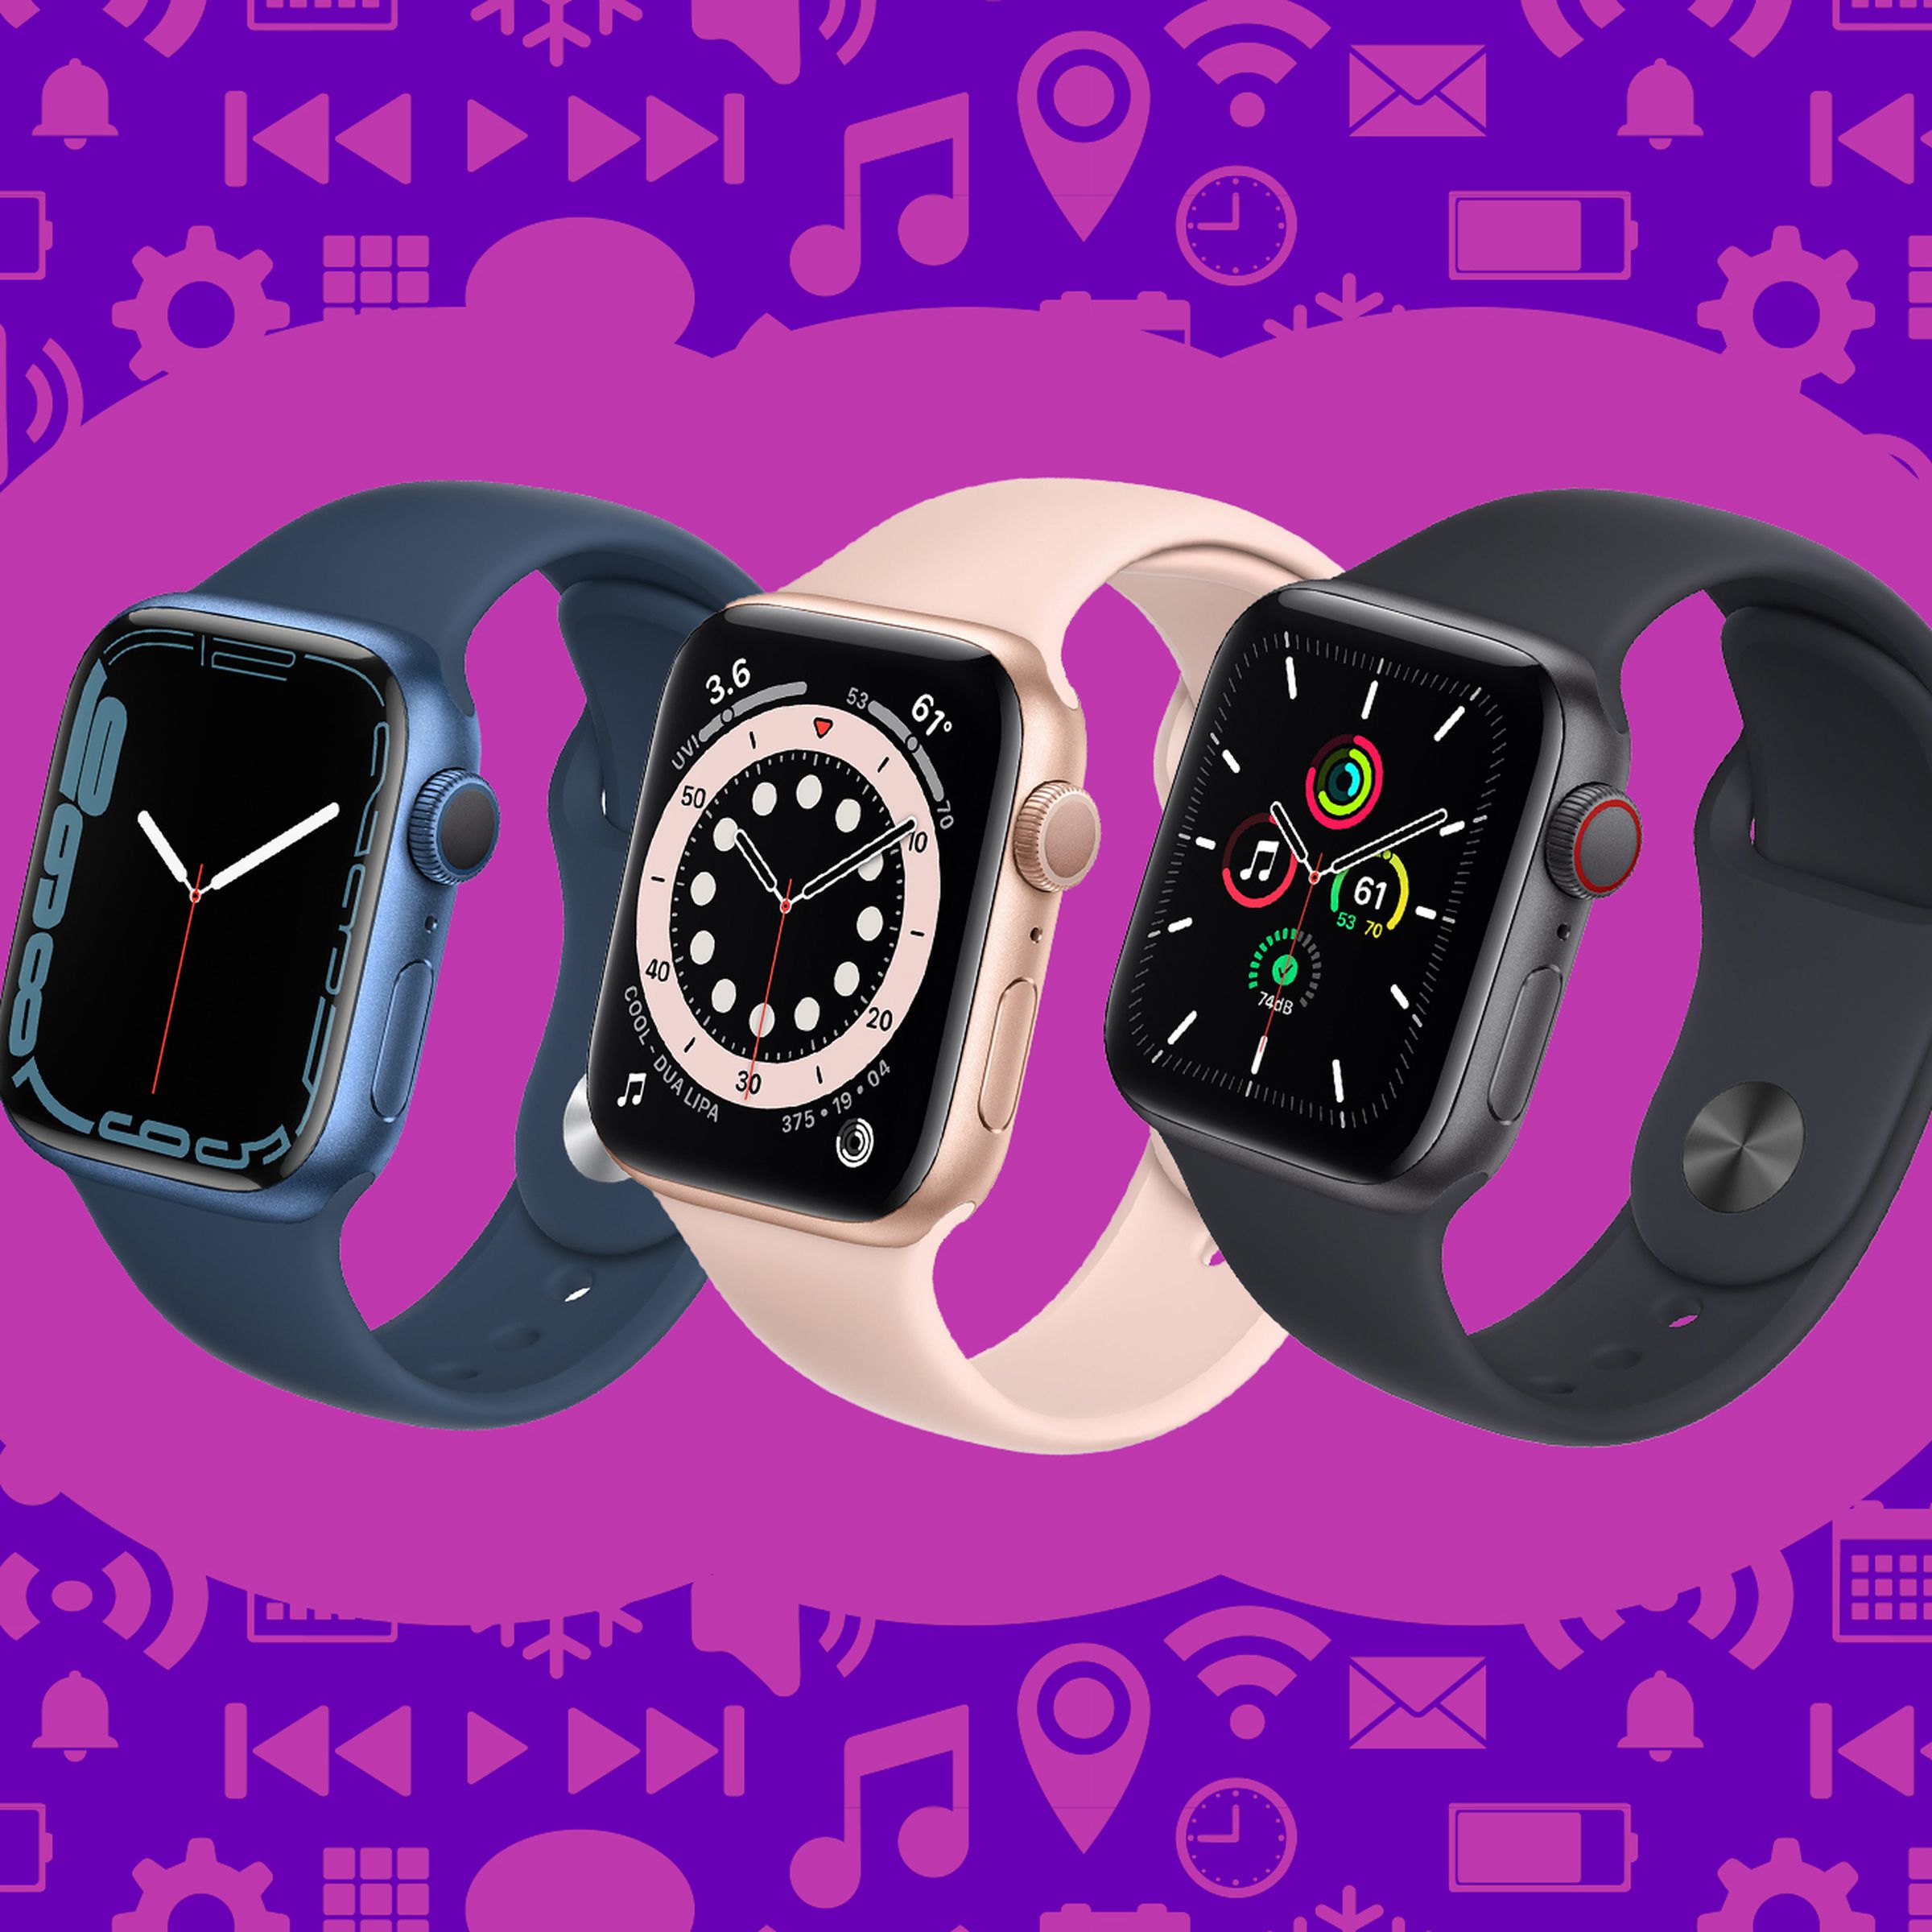 Renders of various Apple Watch models on a colorful illustrated background.